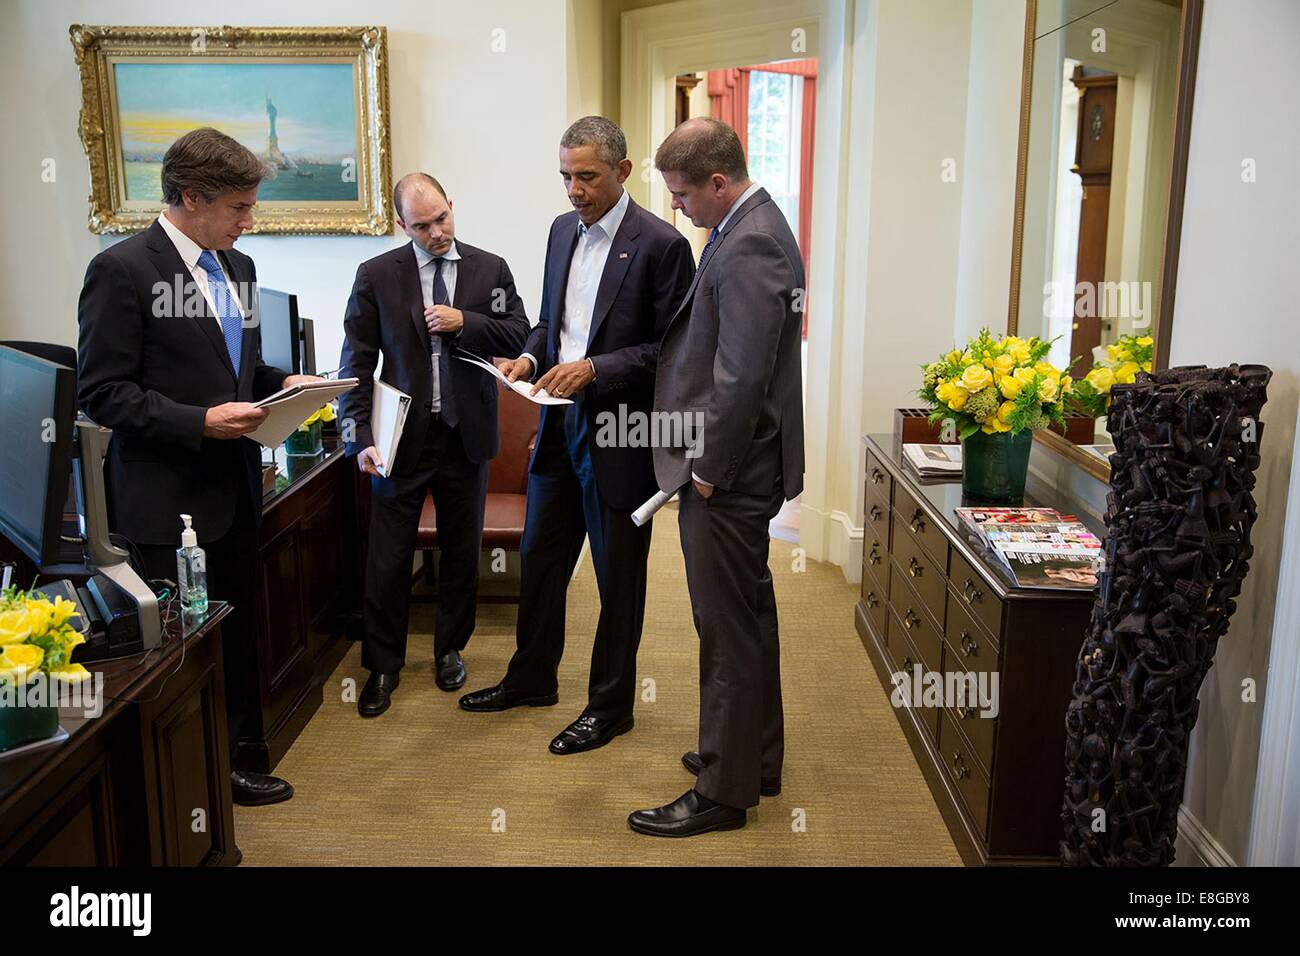 US President Barack Obama talks with, from left, Tony Blinken, Deputy National Security Advisor, Ben Rhodes, Deputy National Security Advisor for Strategic Communications, and Senior Advisor Dan Pfeiffer in the Outer Oval Office before making a statement in the Briefing Room of the White House August 18, 2014 in Washington, DC. Stock Photo